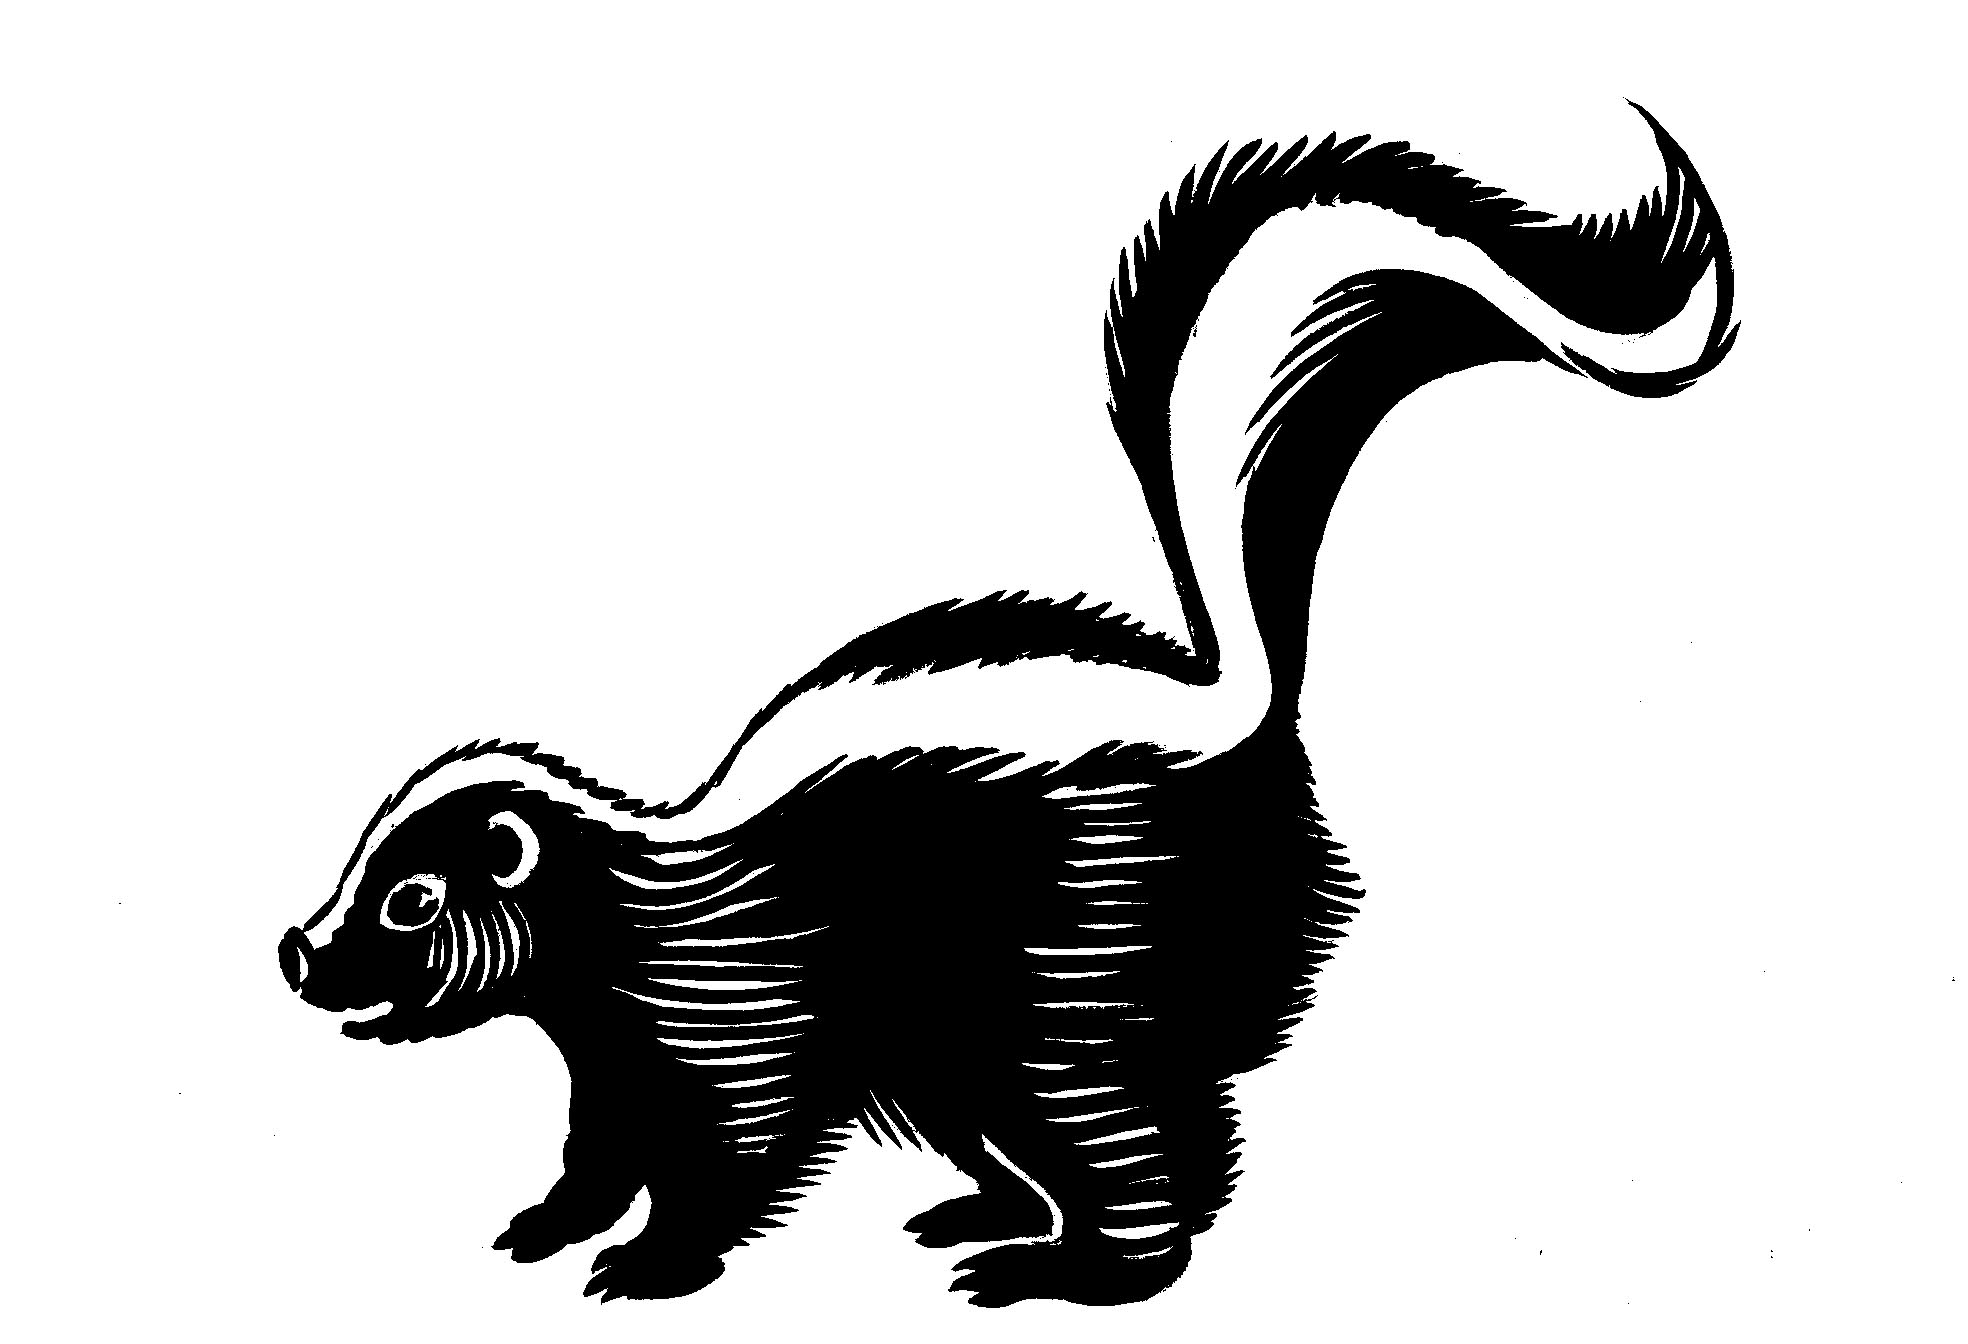 20 Images For Cartoon Skunk Displaying 20 Images For Cartoon Skunk